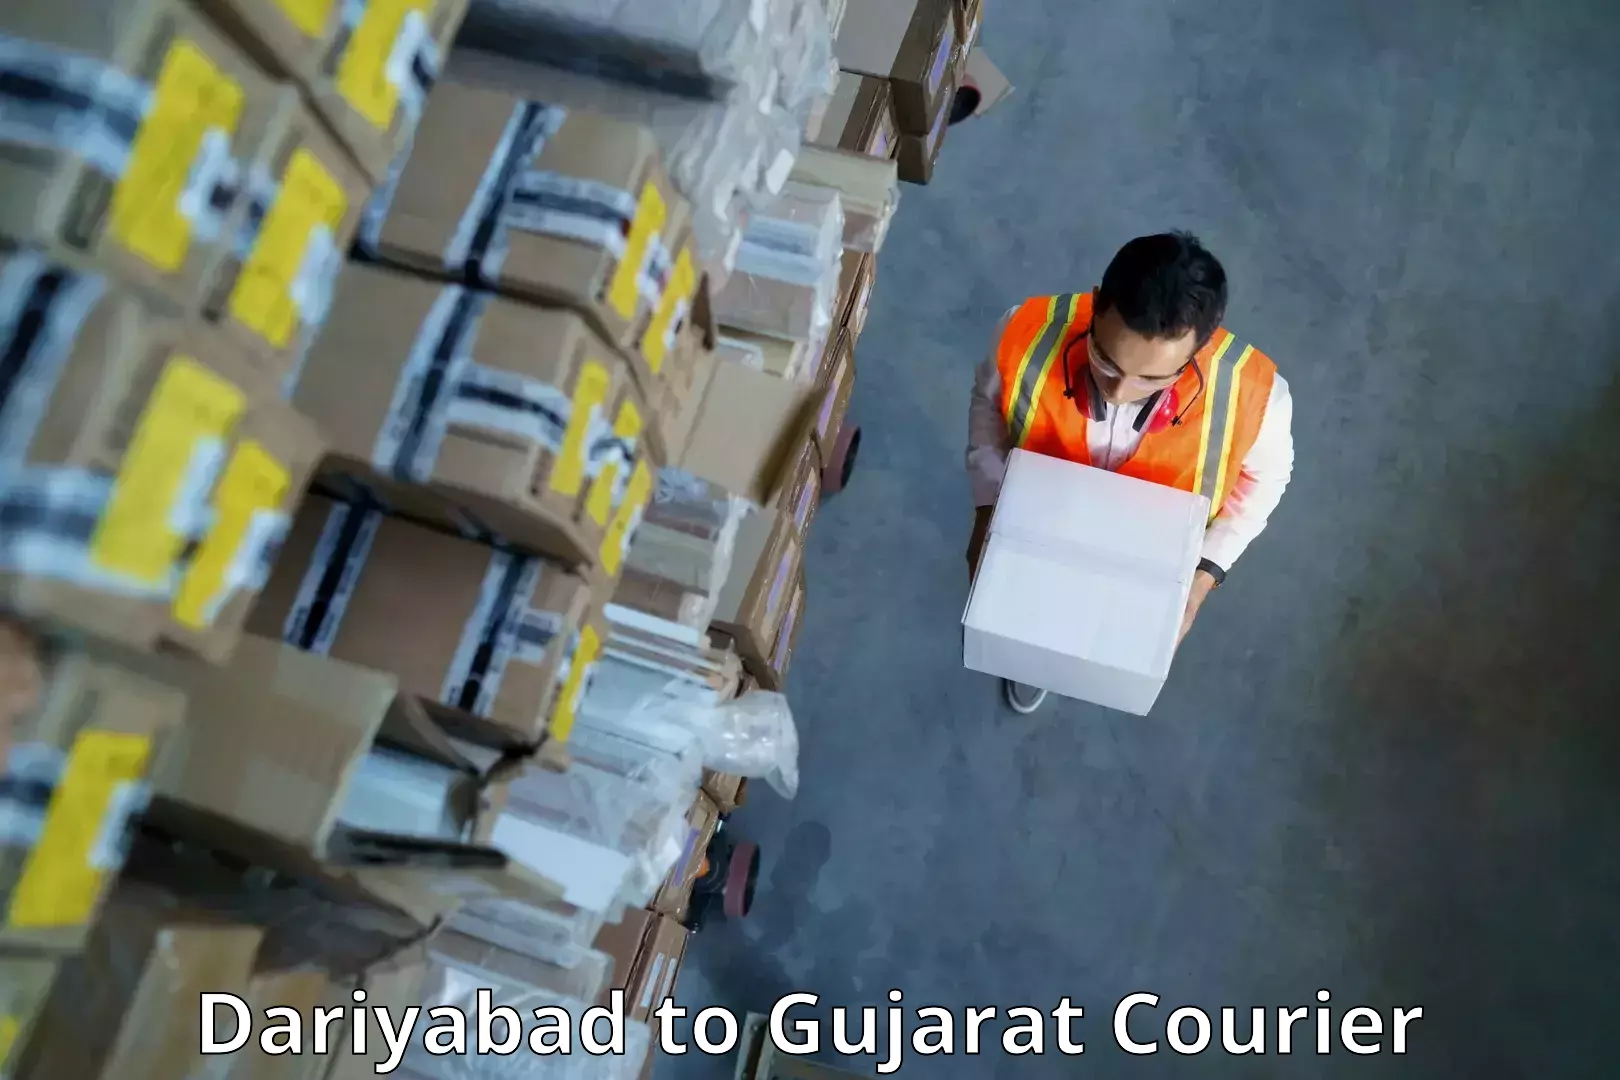 Multi-national courier services Dariyabad to Gujarat